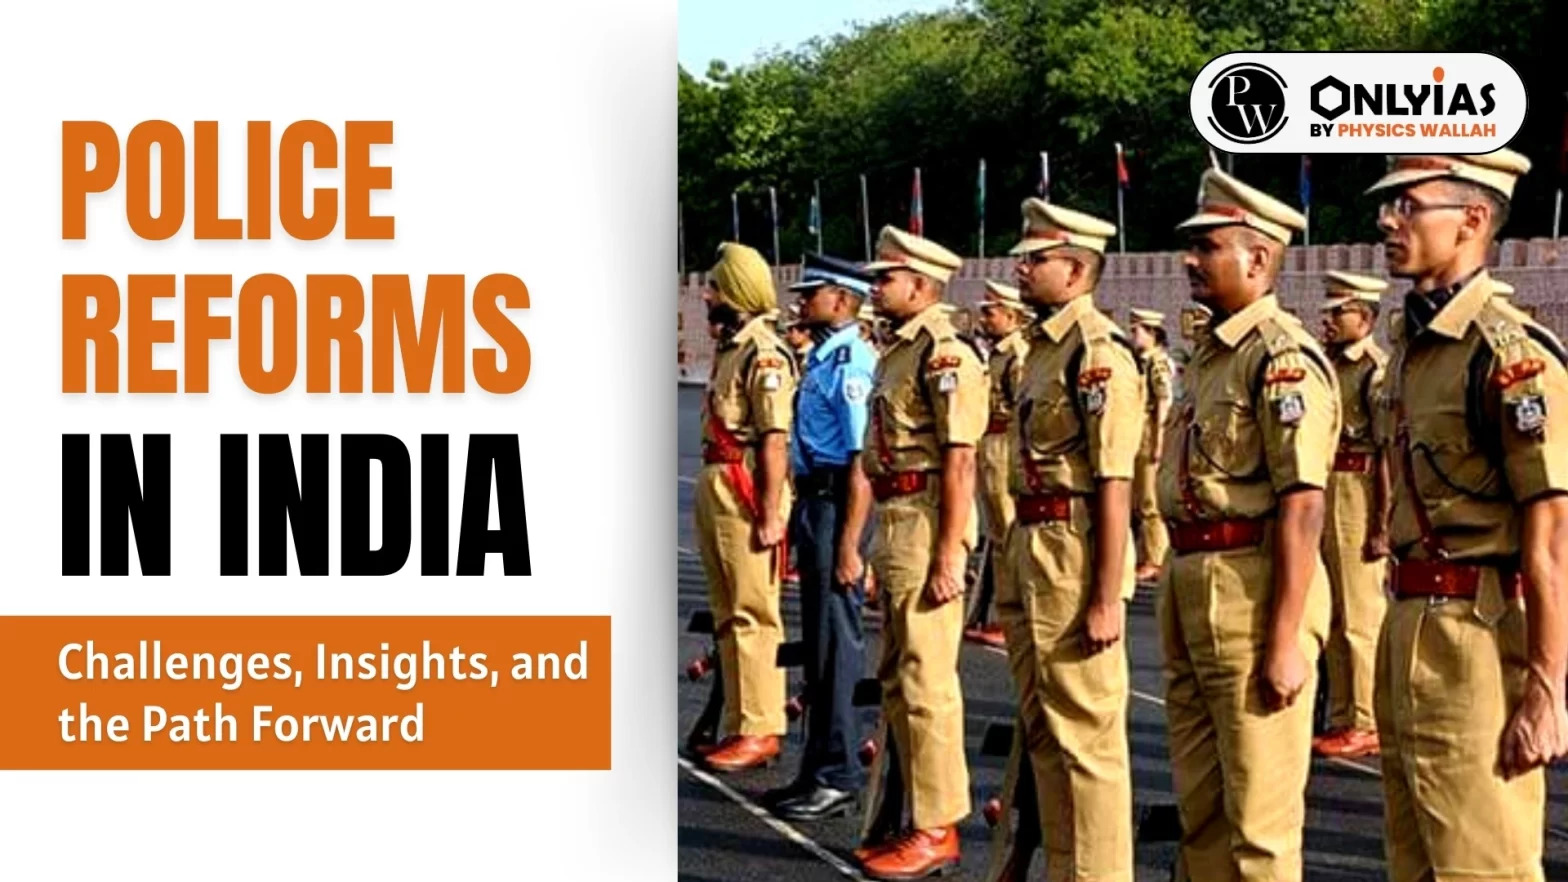 Police Reforms in India: Challenges, Insights, and the Path Forward